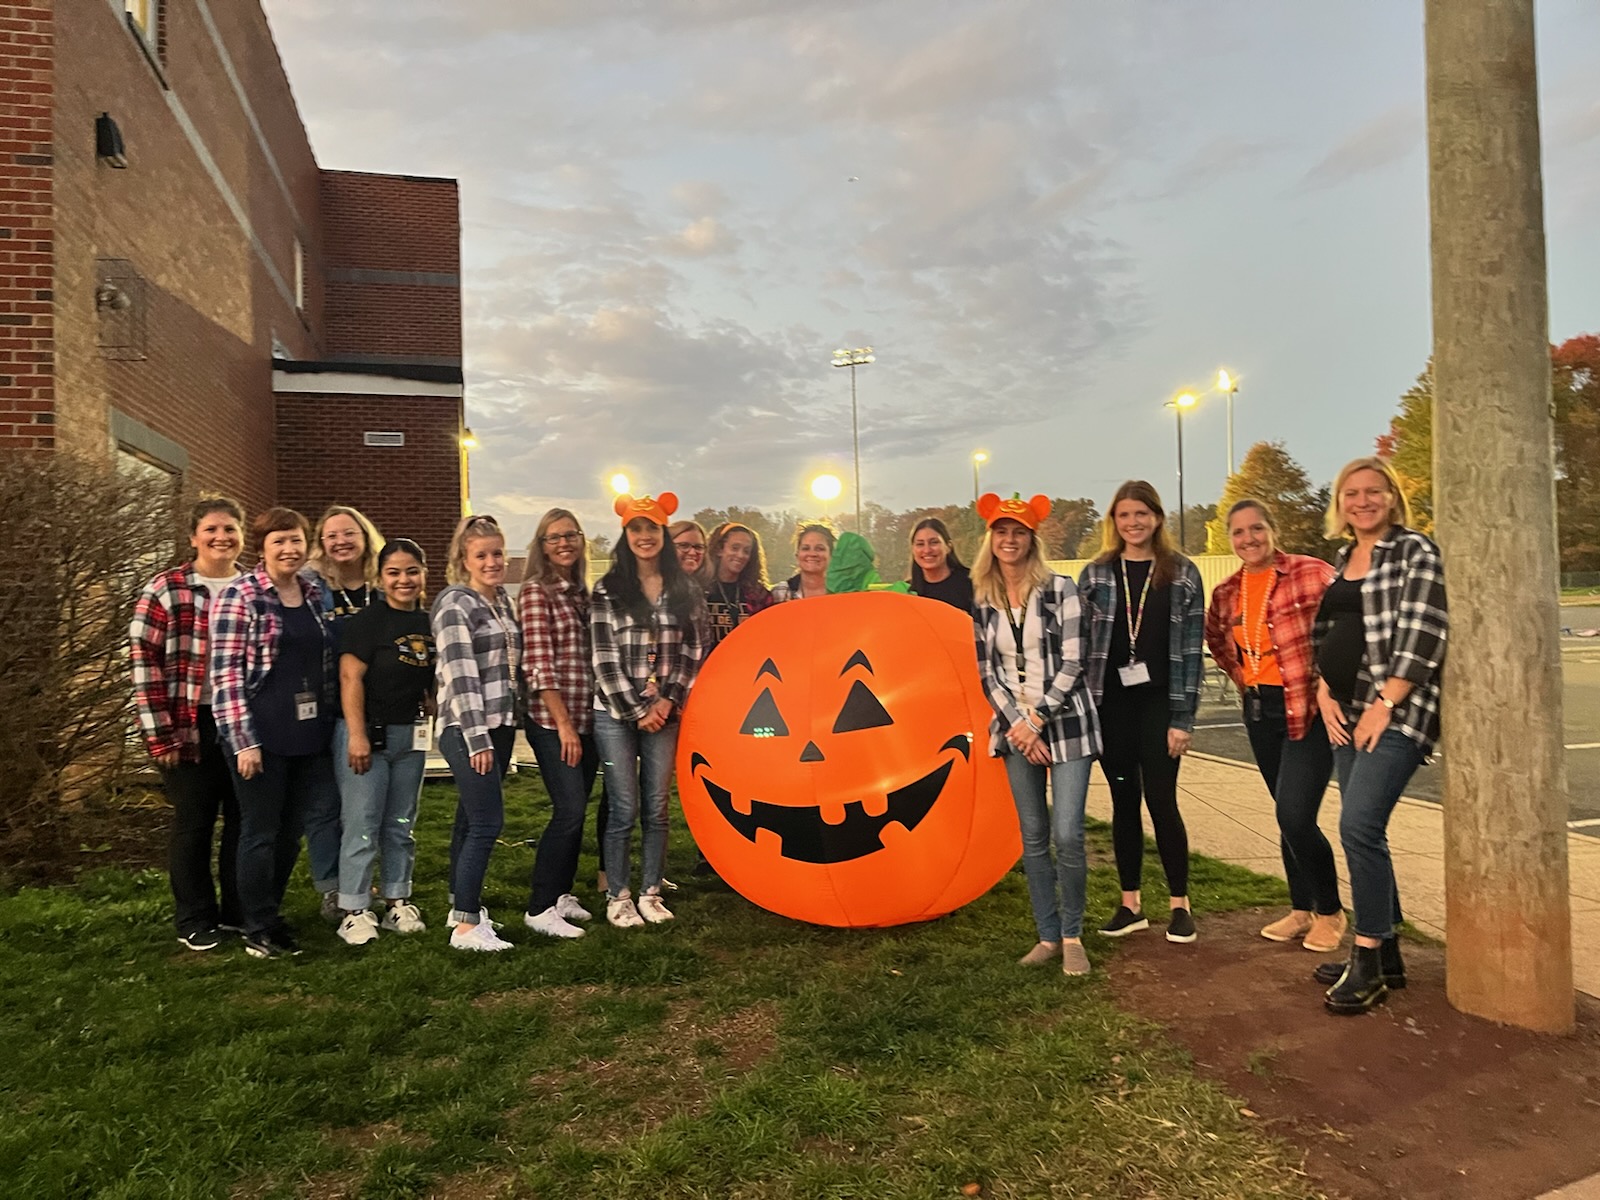 adults in plaid posing for the camera around an orange blow up pumpkin